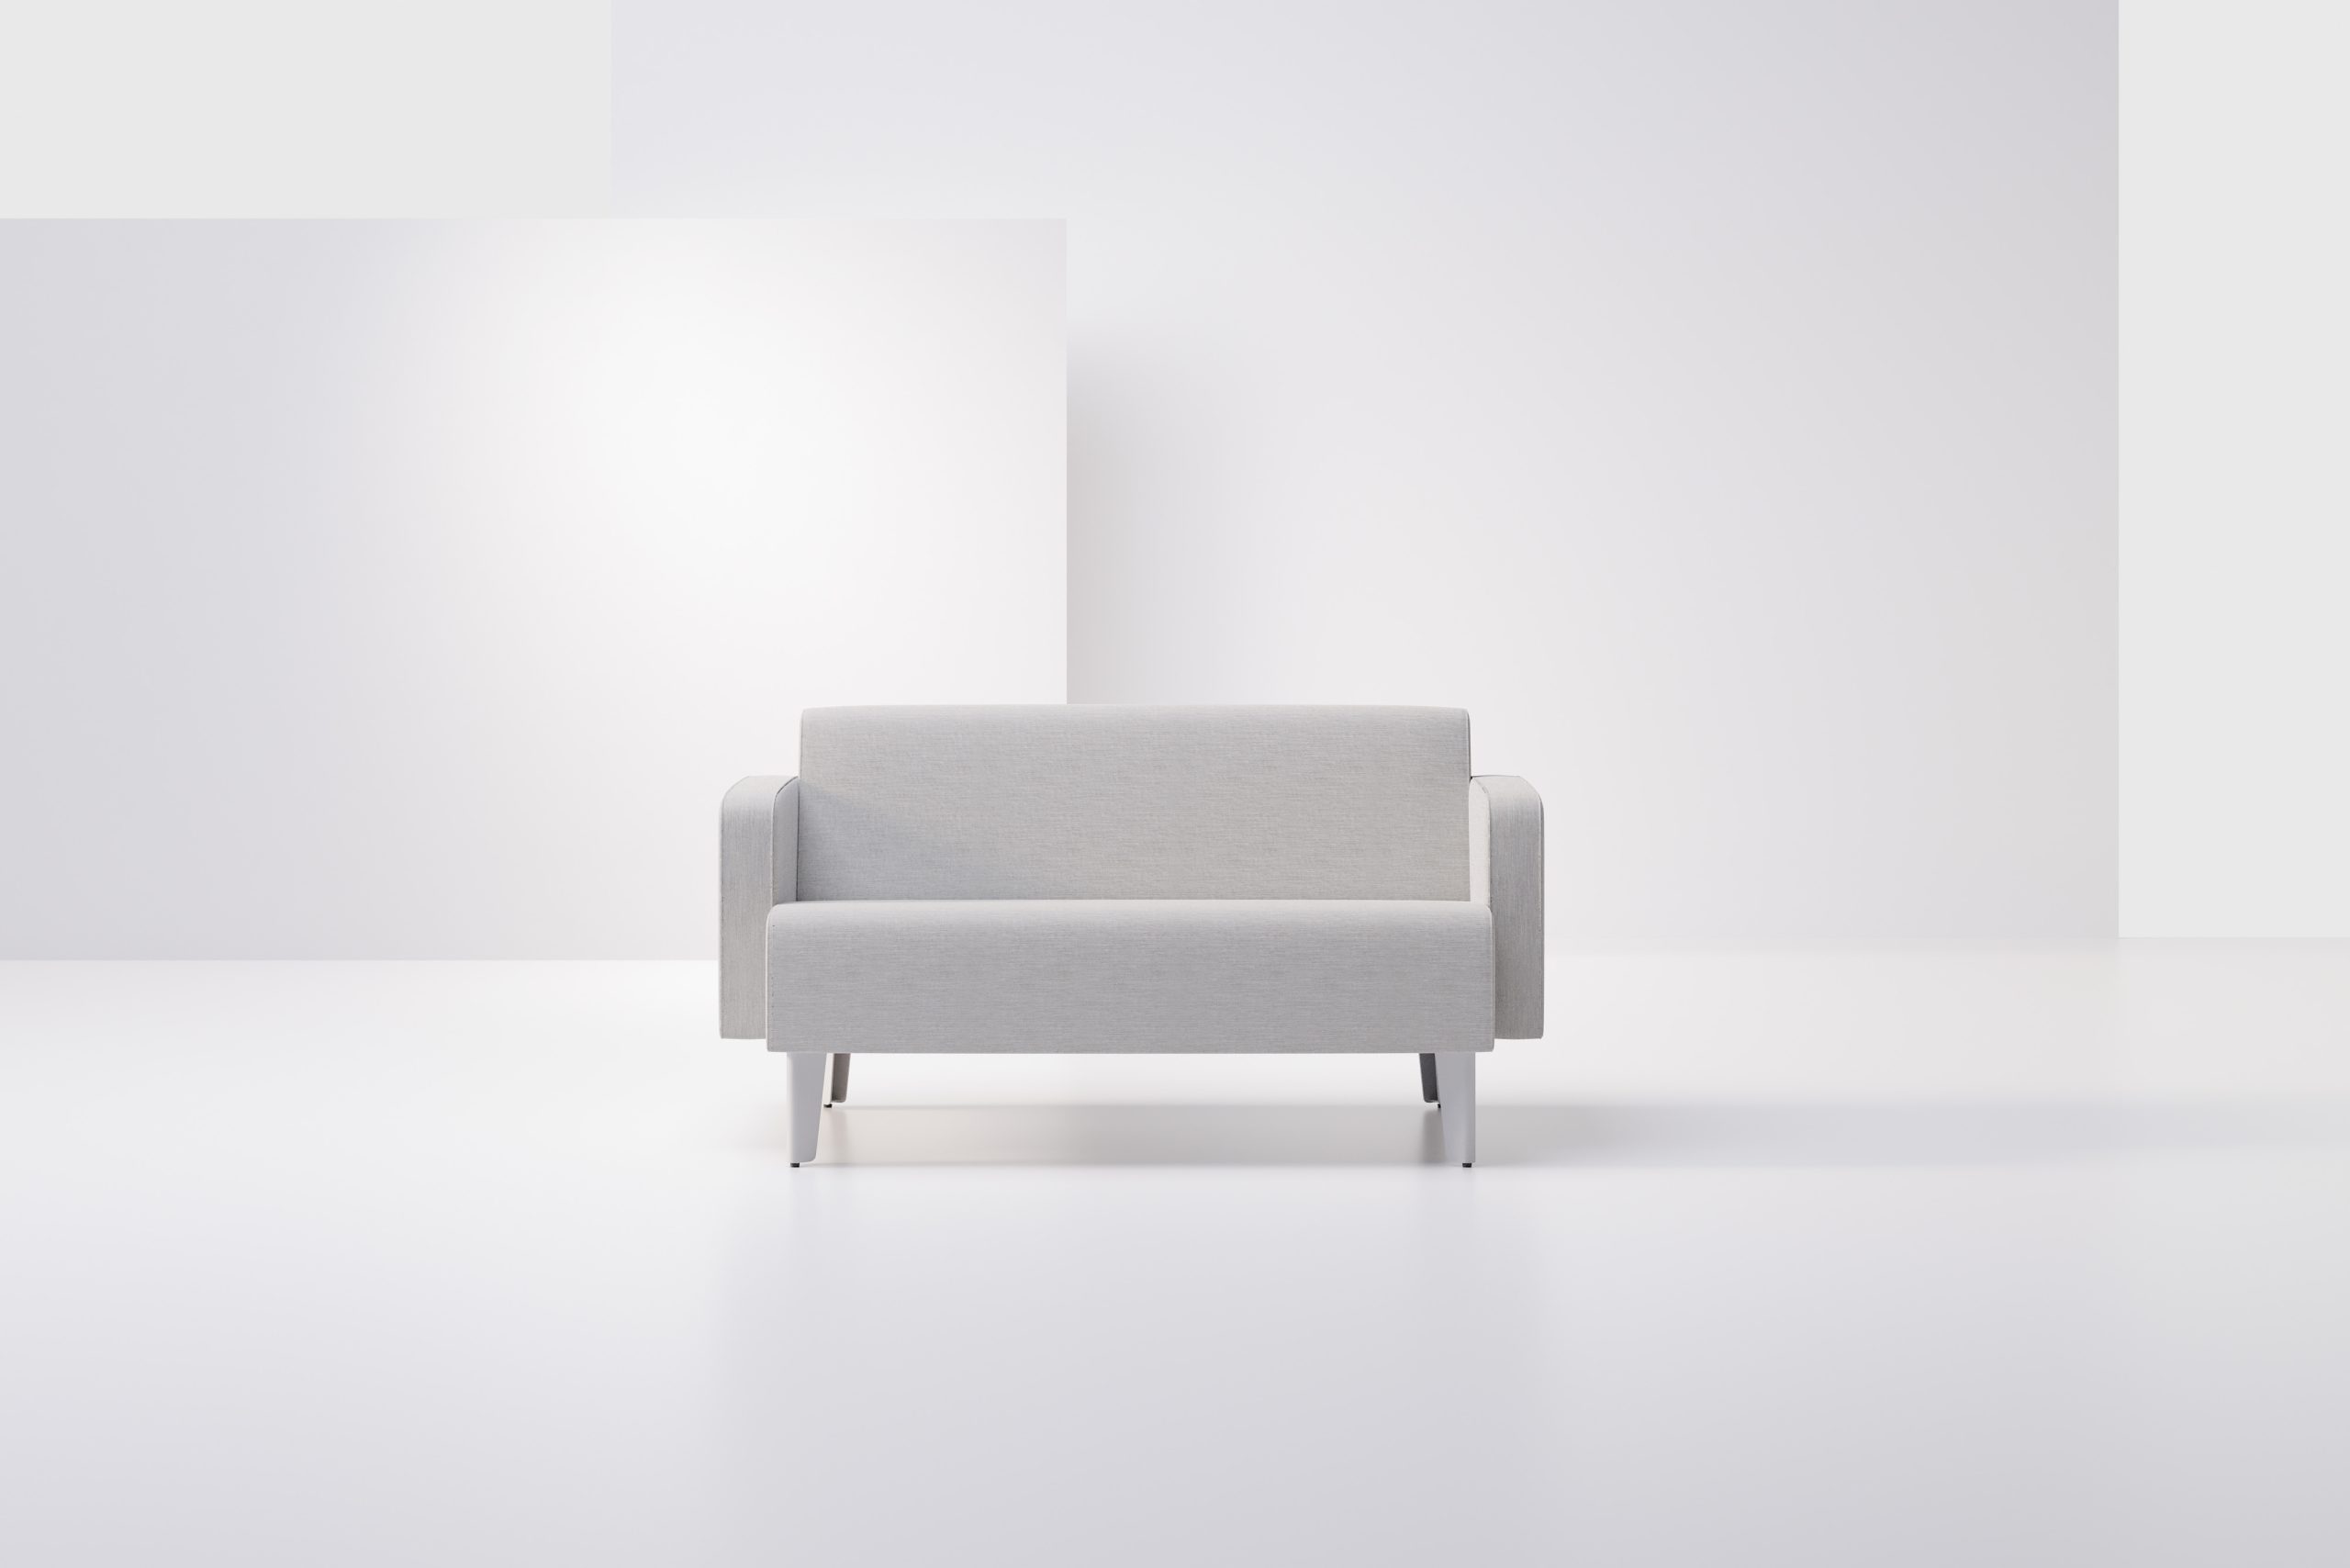 Avila Lounge Soft with Upholstered Arms Featured Product Image